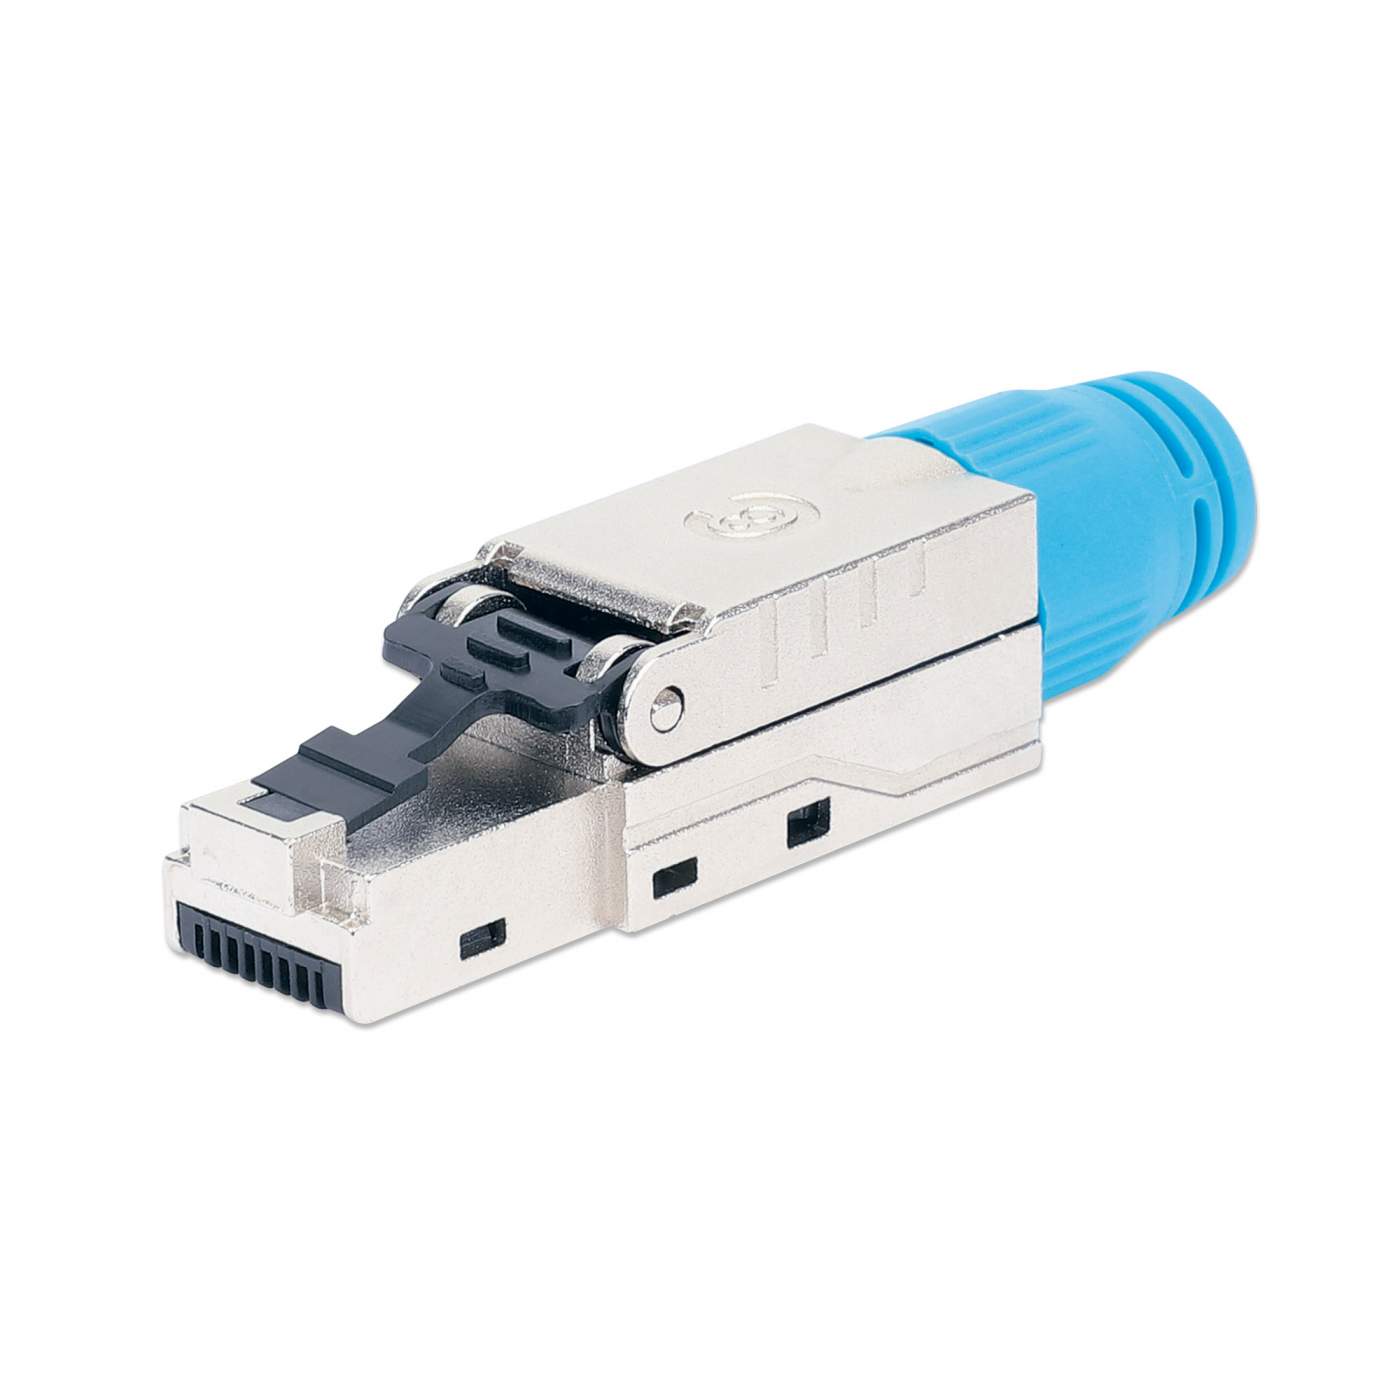 VCELINK RJ45 Connectors Tool Free Cat 8, Shielded RJ45 Modular Plugs 40  Gbps 2000MHz PoE++, Reusable Easy CAT 8 Termination for 23 AWG-22 AWG LAN